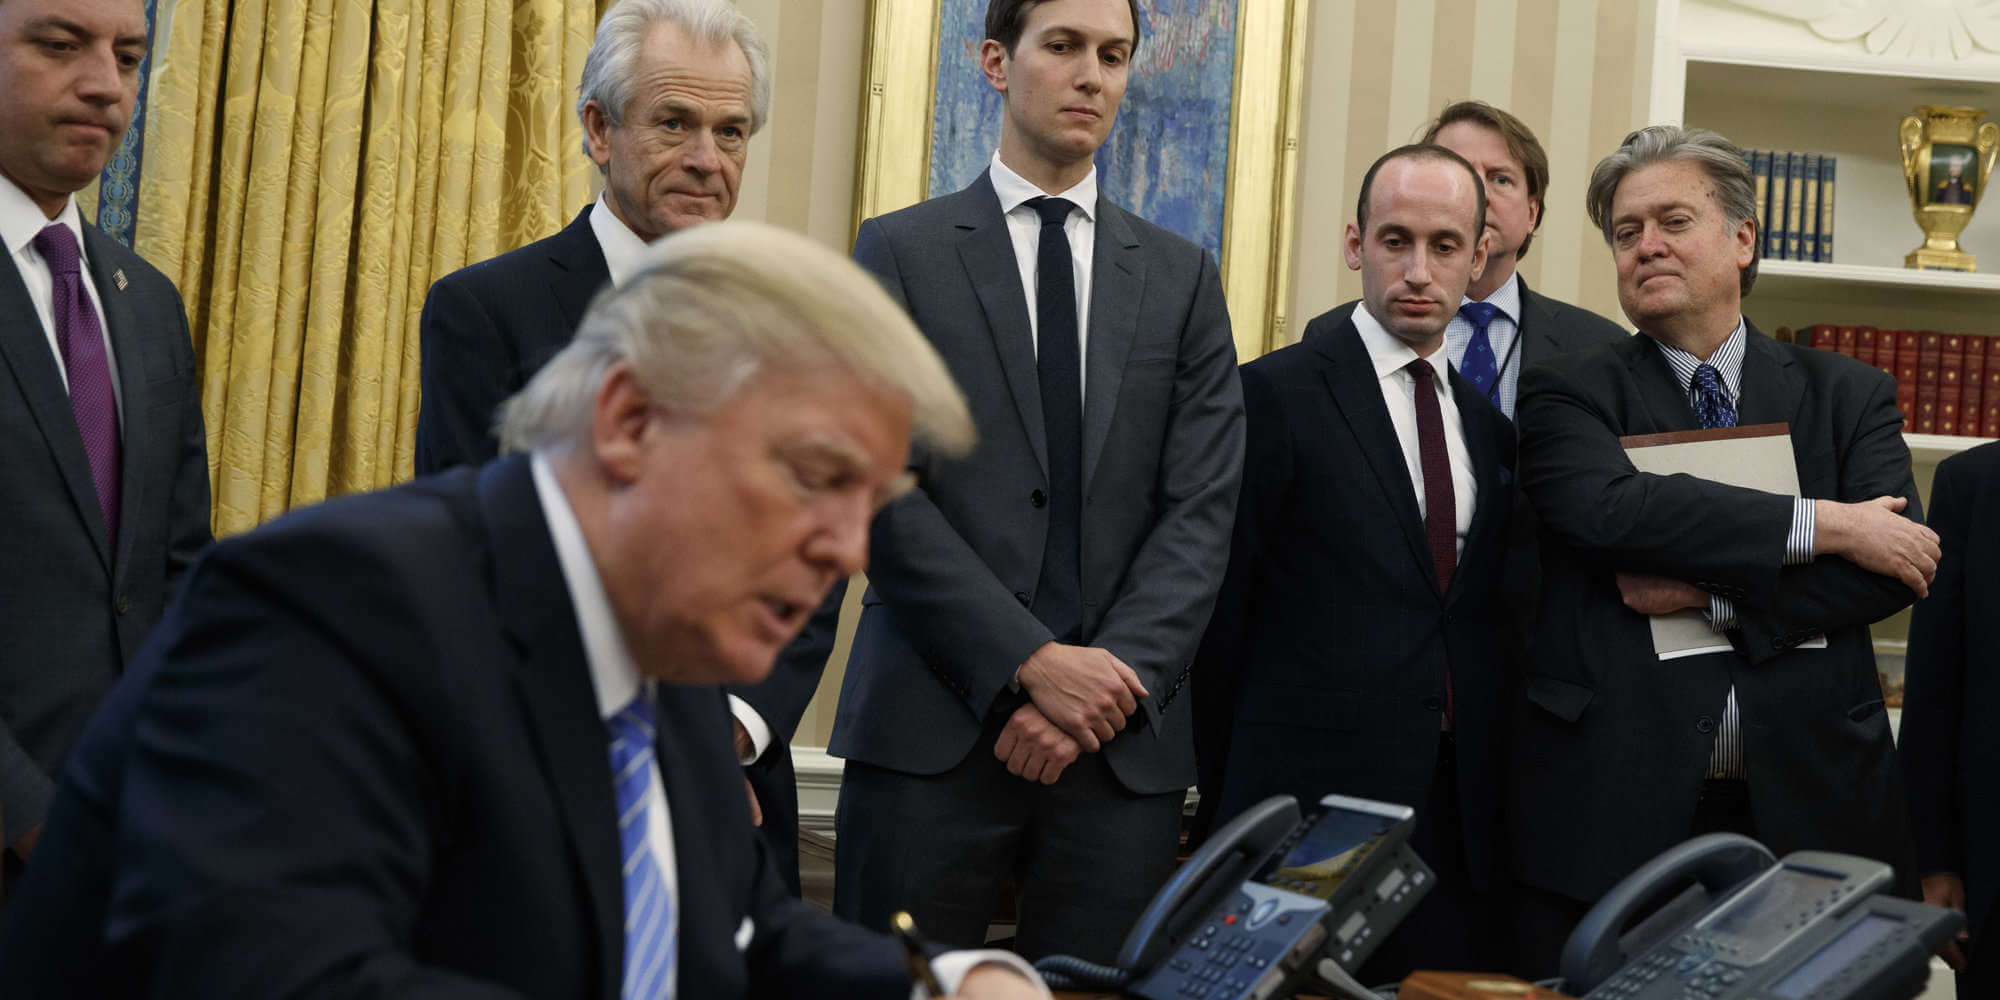 From left, White House Chief of Staff Reince Priebus, National Trade Council adviser Peter Navarro, Senior Adviser Jared Kushner, policy adviser Stephen Miller, and chief strategist Steve Bannon watch as President Donald Trump signs an executive order in the Oval Office of the White House, Monday, Jan. 23, 2017, in Washington. (AP Photo/Evan Vucci)